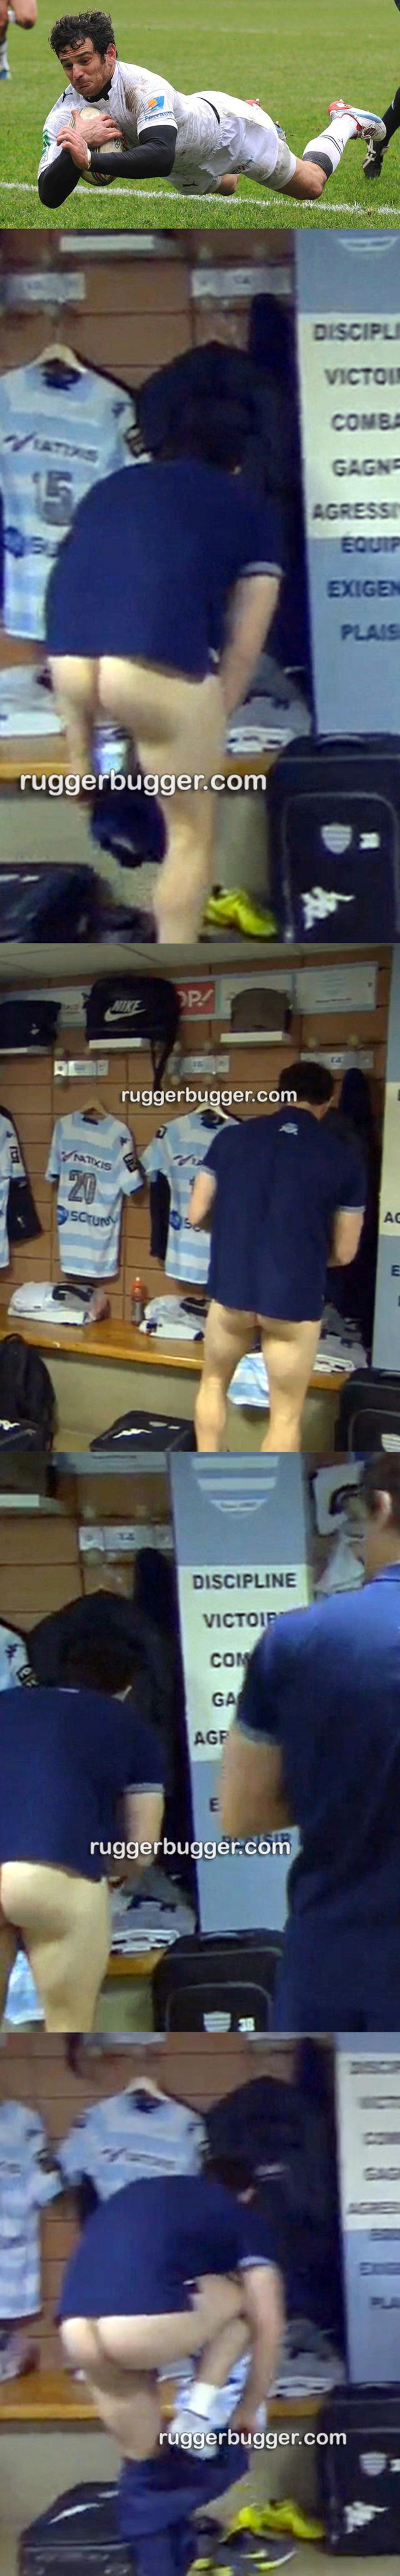 rugby player yoan audrin ass exposed changing room